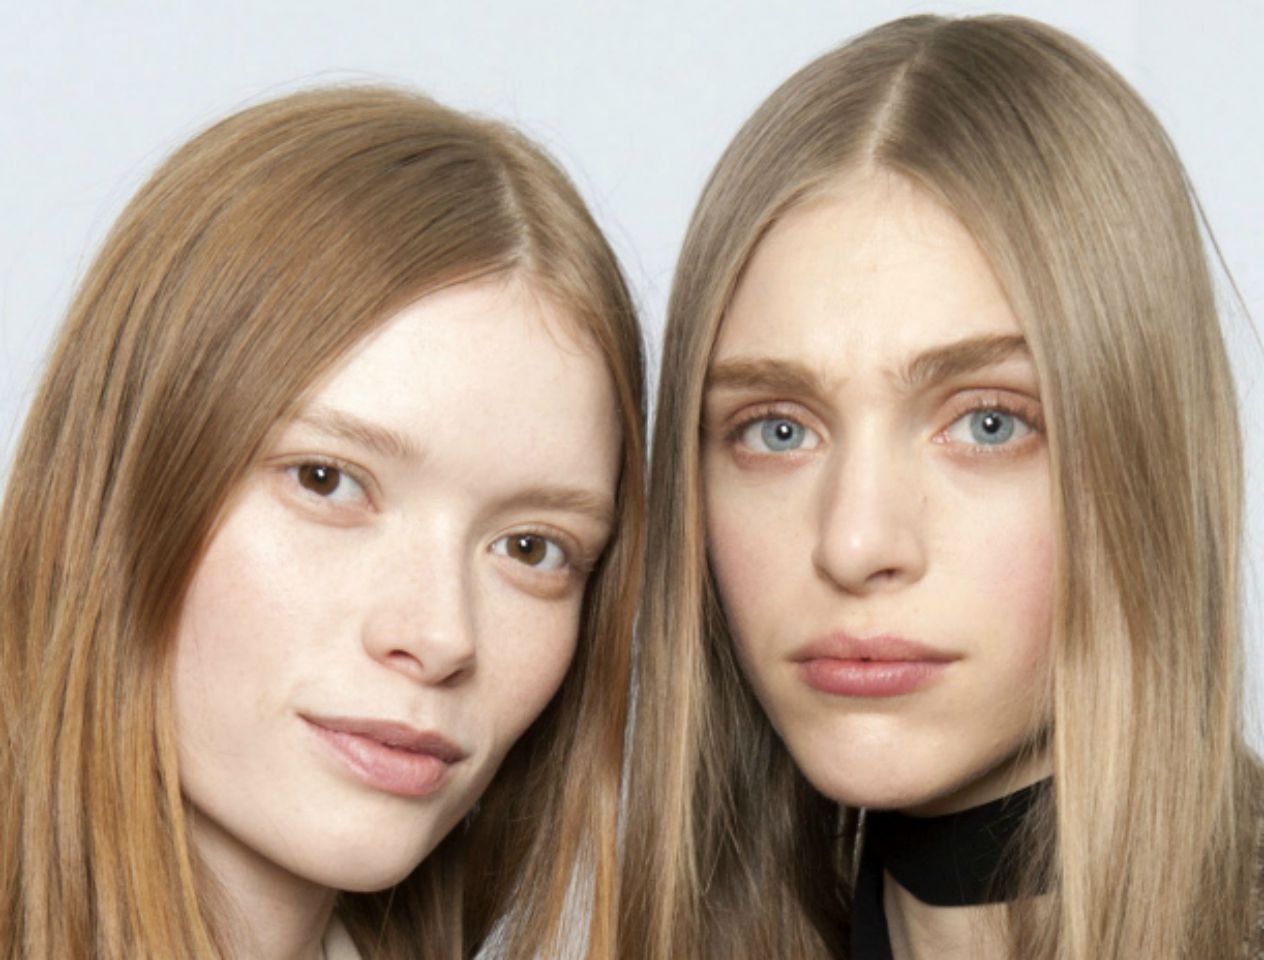 how to choose the right brow product for blondes and redheads